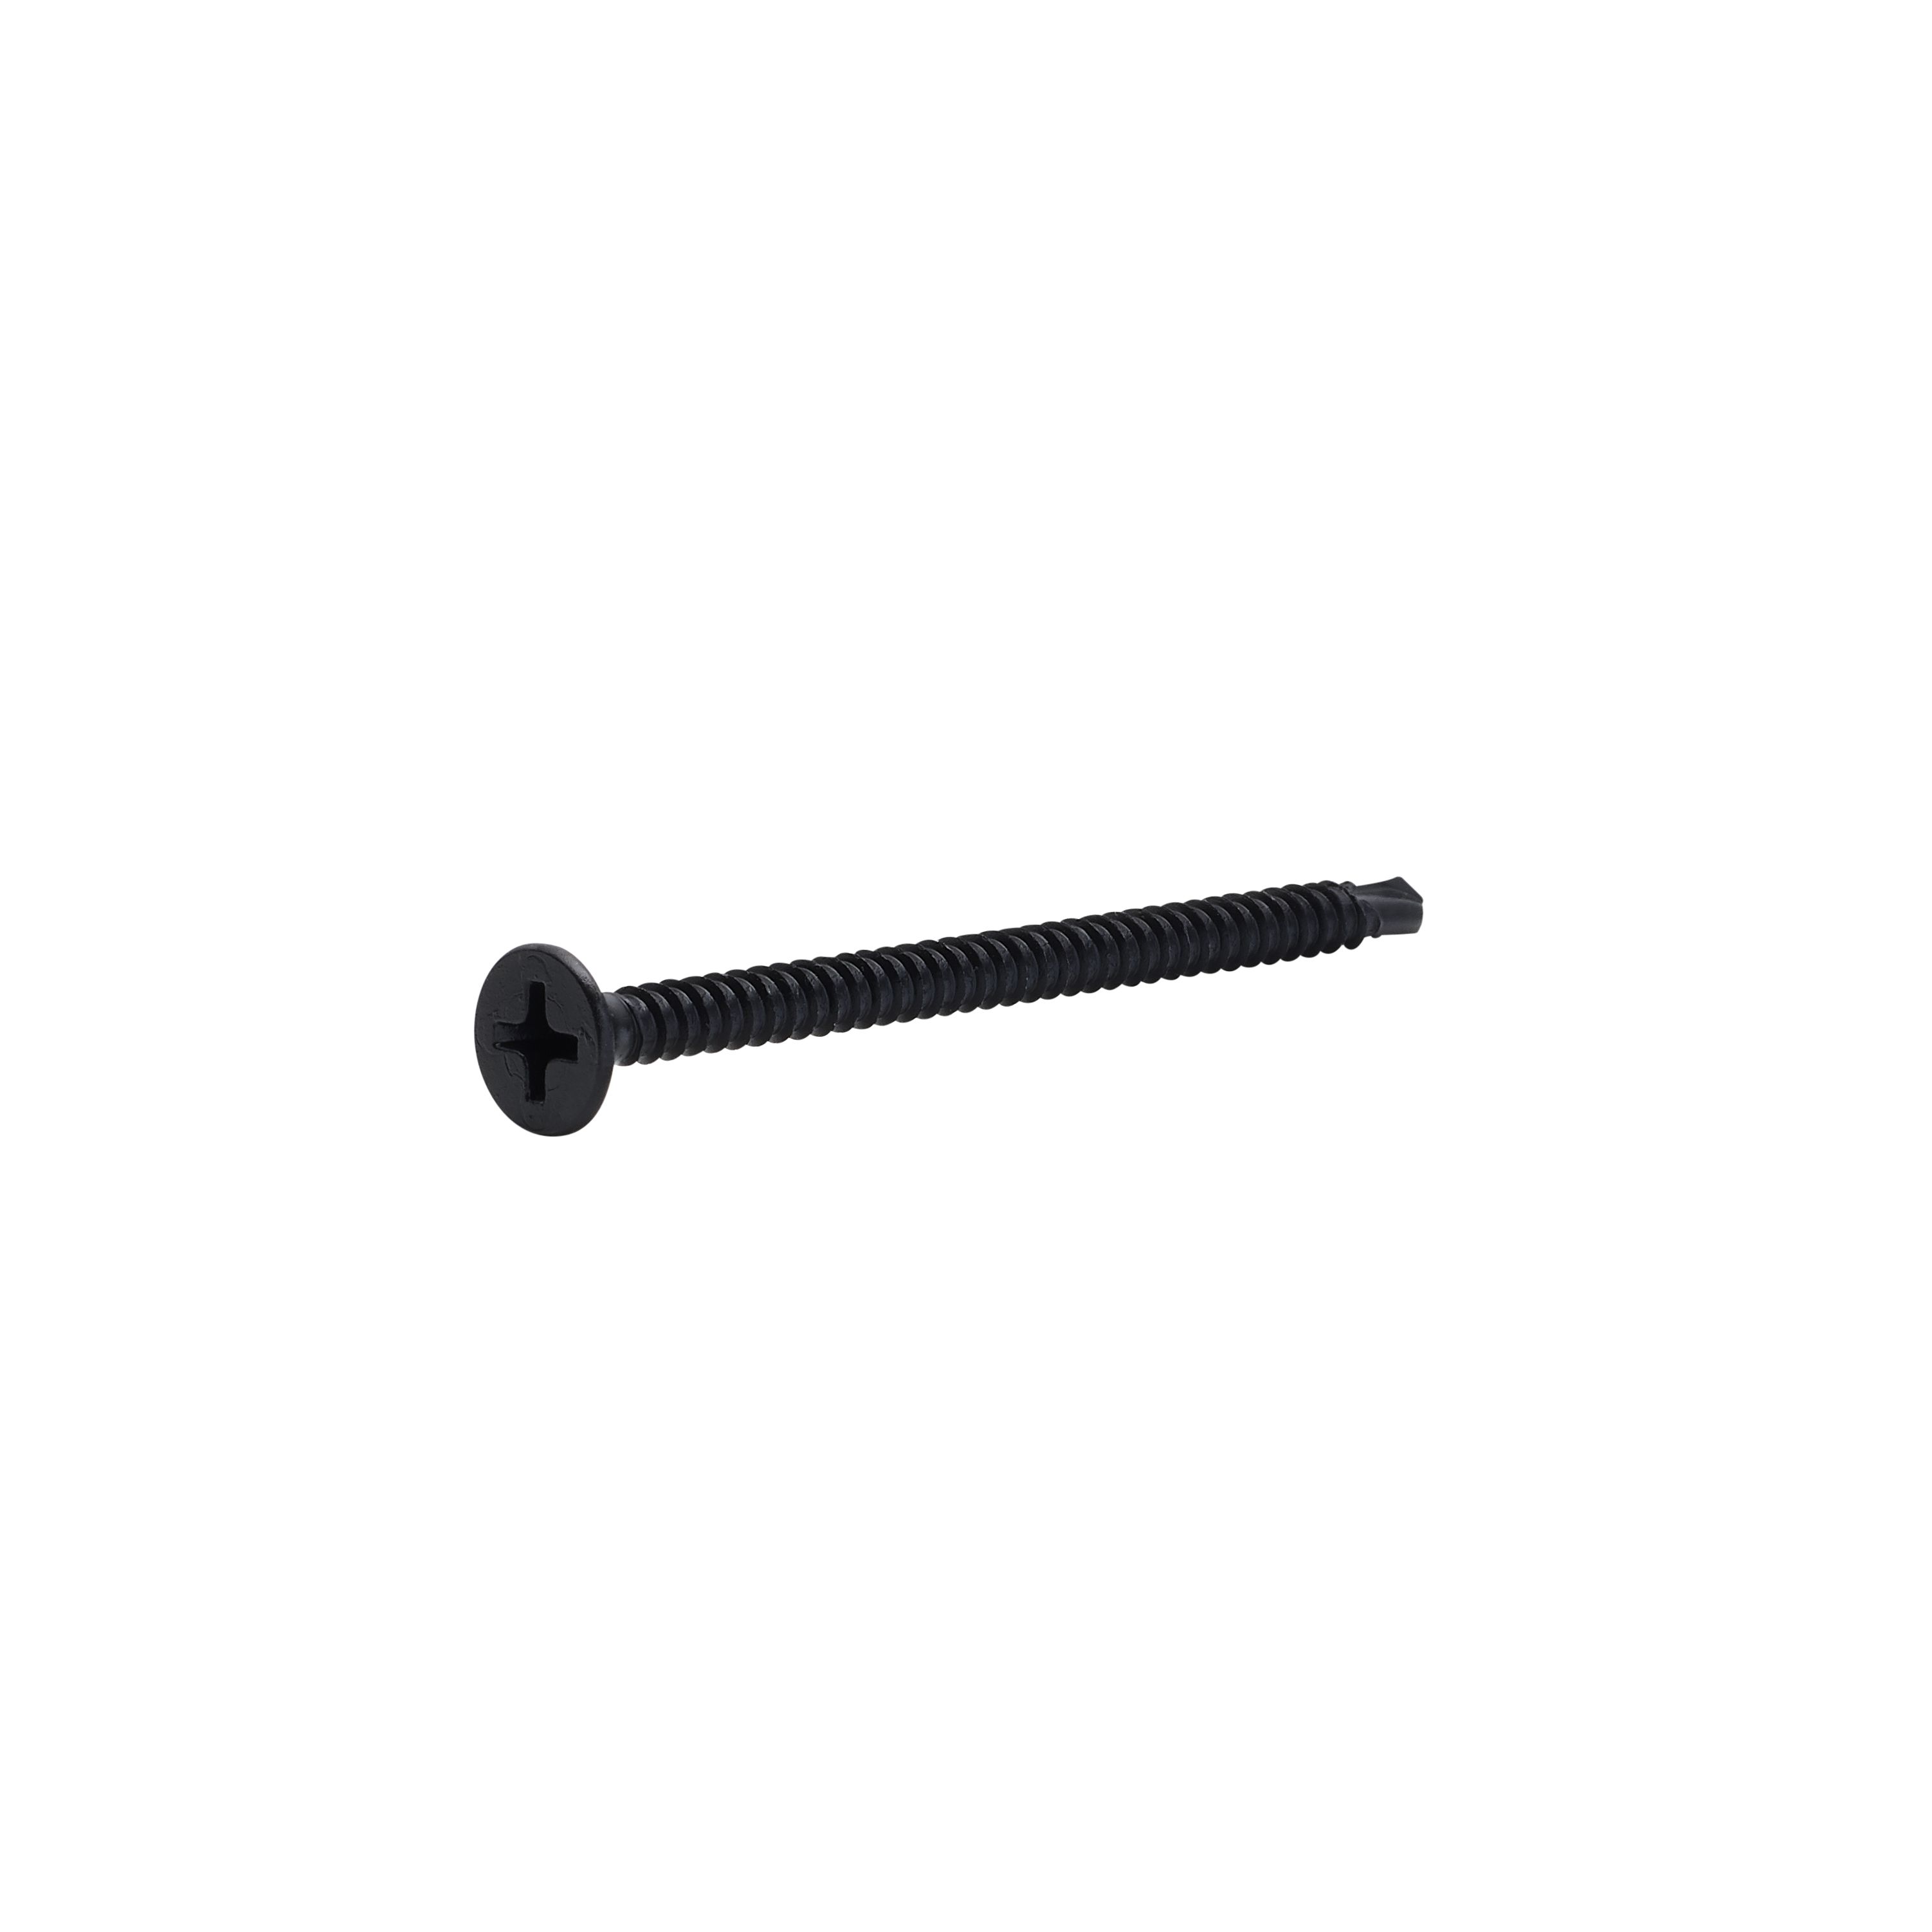 Diall Fine Iron Plasterboard screw (Dia)3.5mm (L)55mm, Pack of 1000